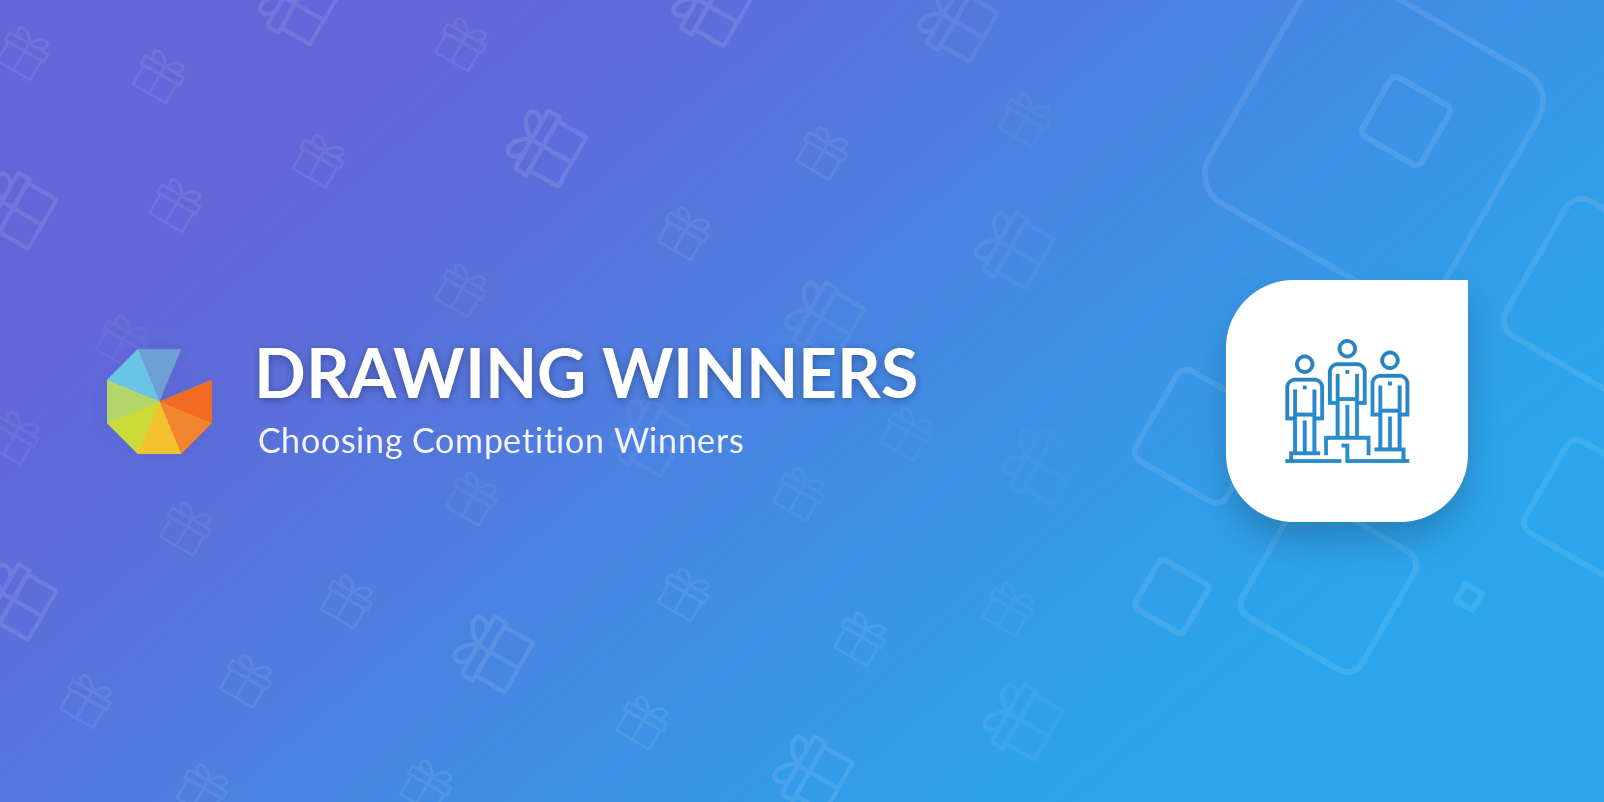 How to Draw Competition Winners in Gleam.io